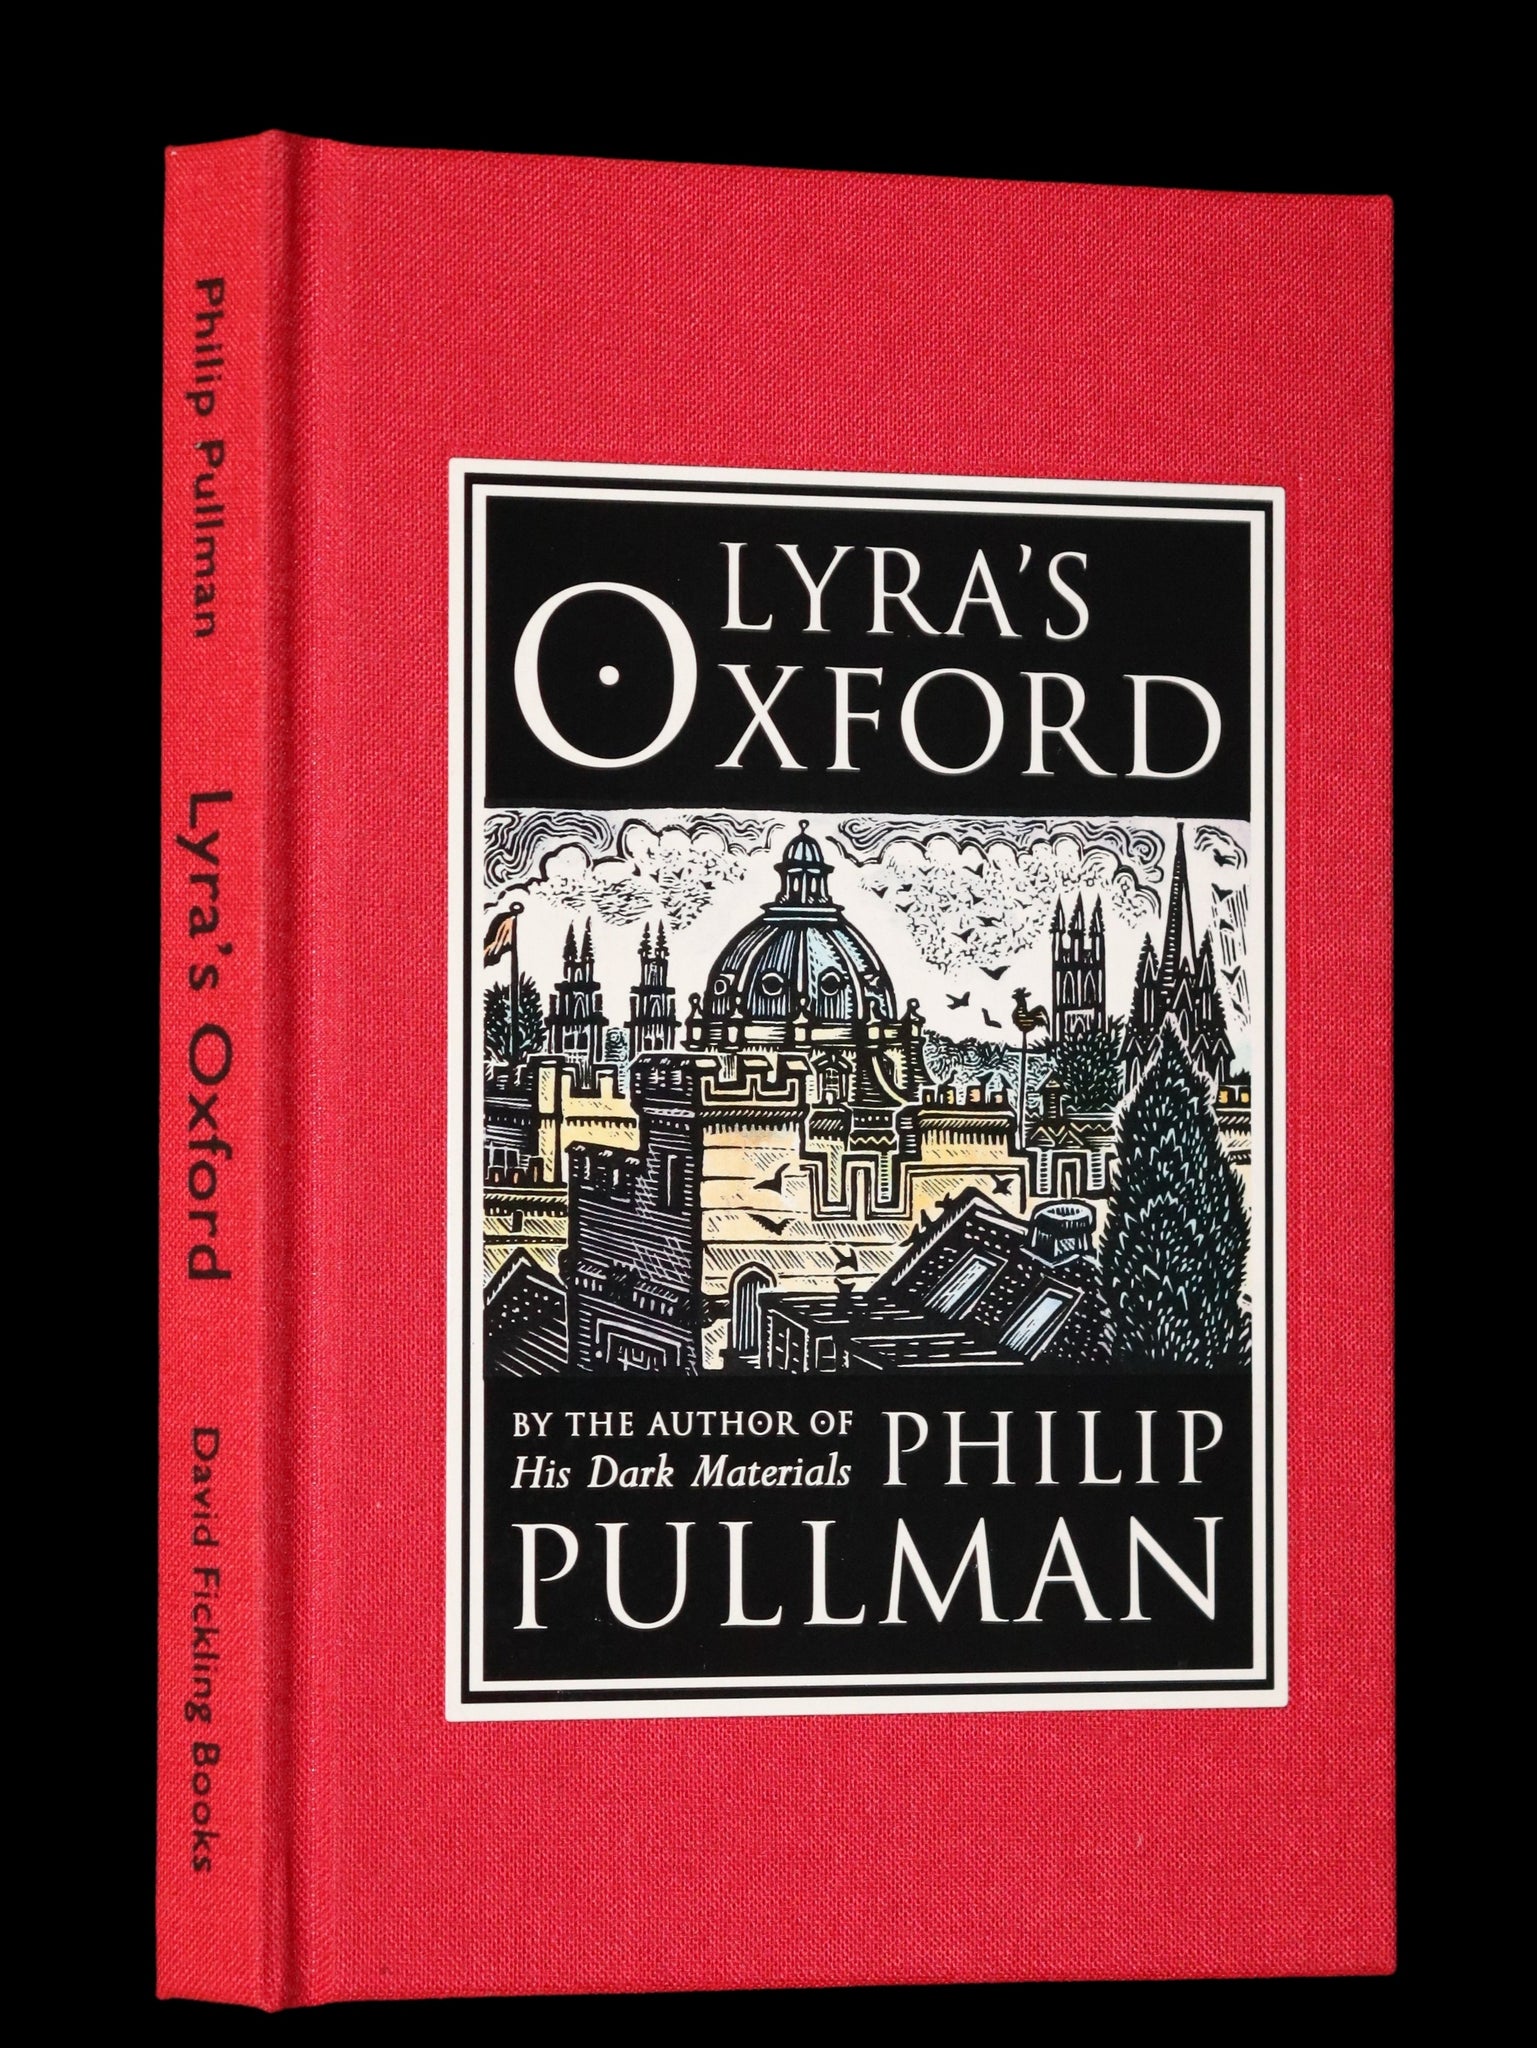 2003 Signed First Edition - LYRA'S OXFORD [His Dark Materials] by Philip Pullman. Illustrated.